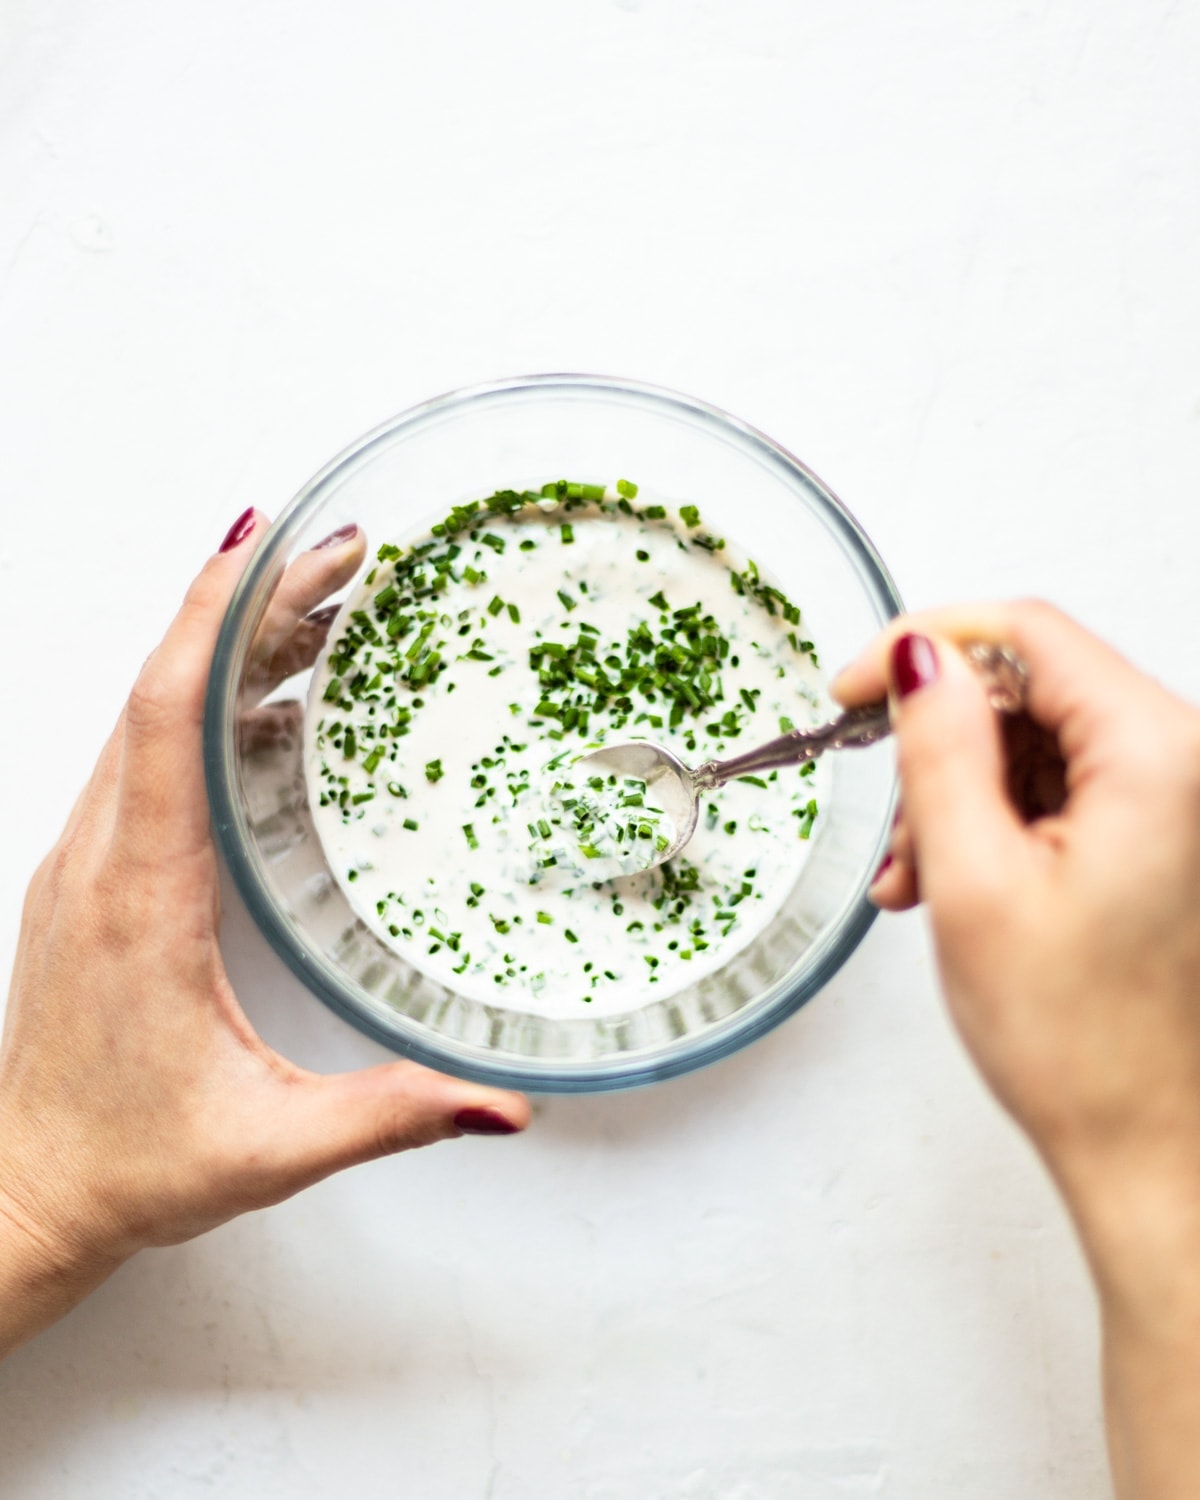 A glass bowl, on a white background, filled with the chive dip being stirred to mix in the freshly chopped chives.